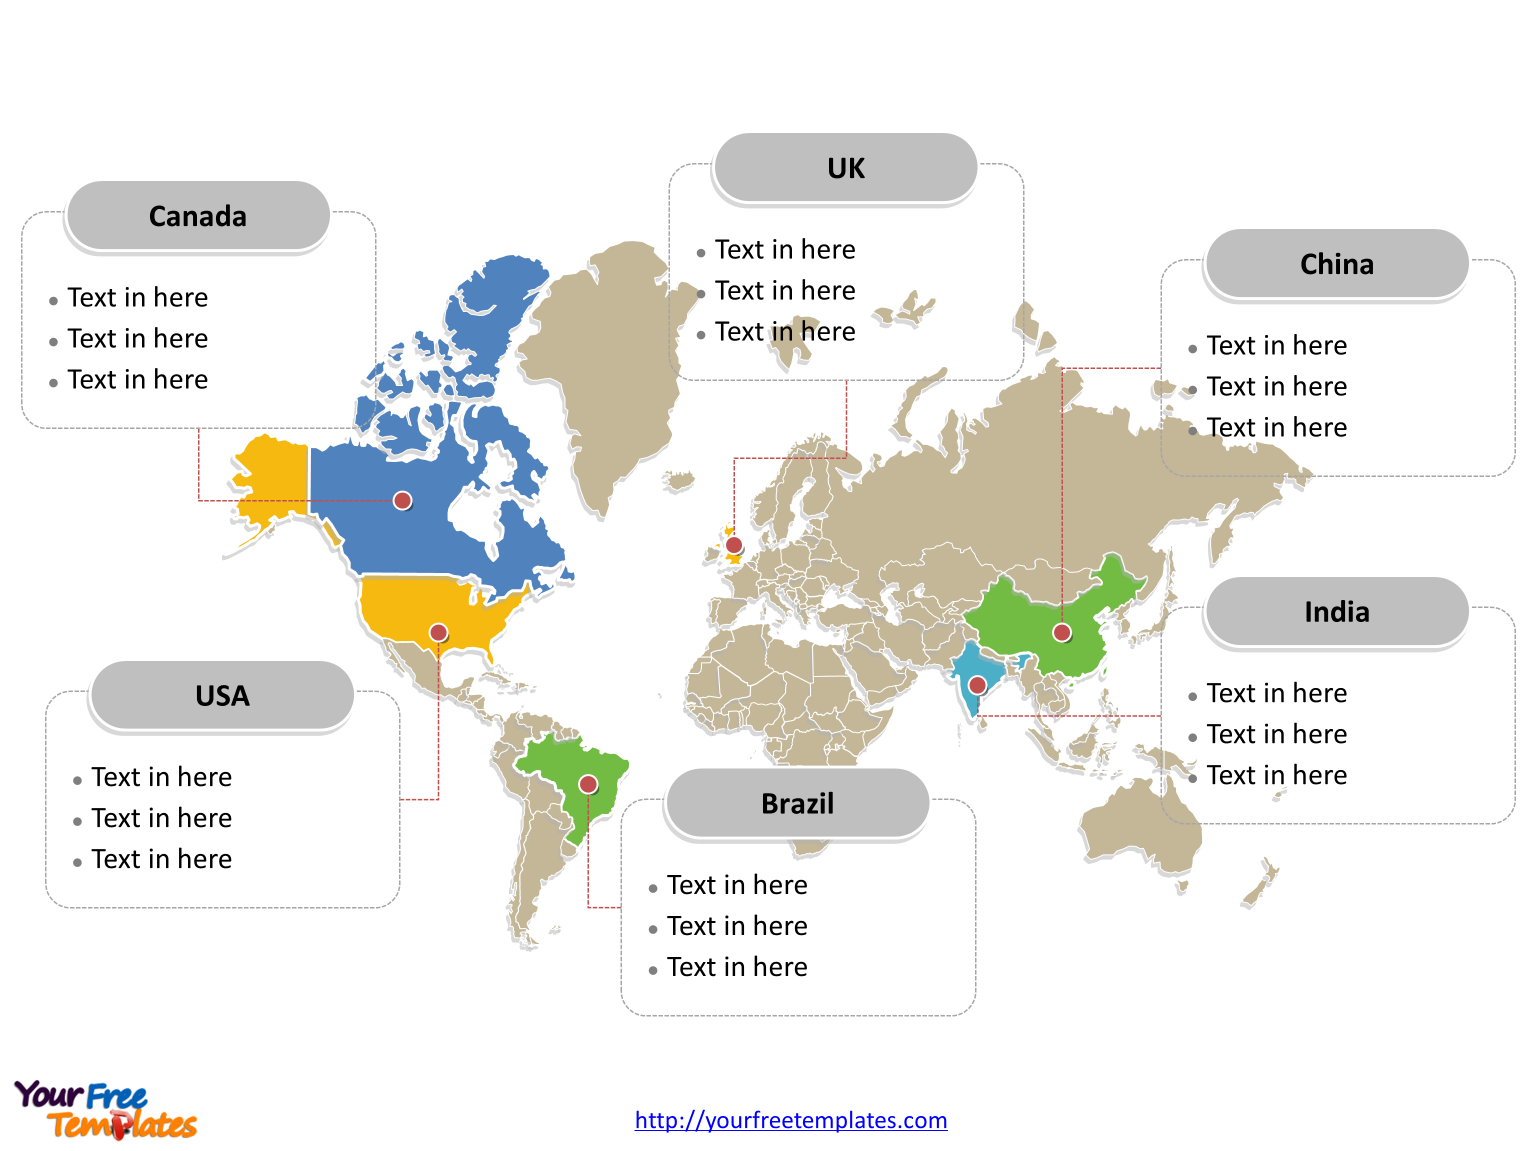 World Map free powerpoint templates.